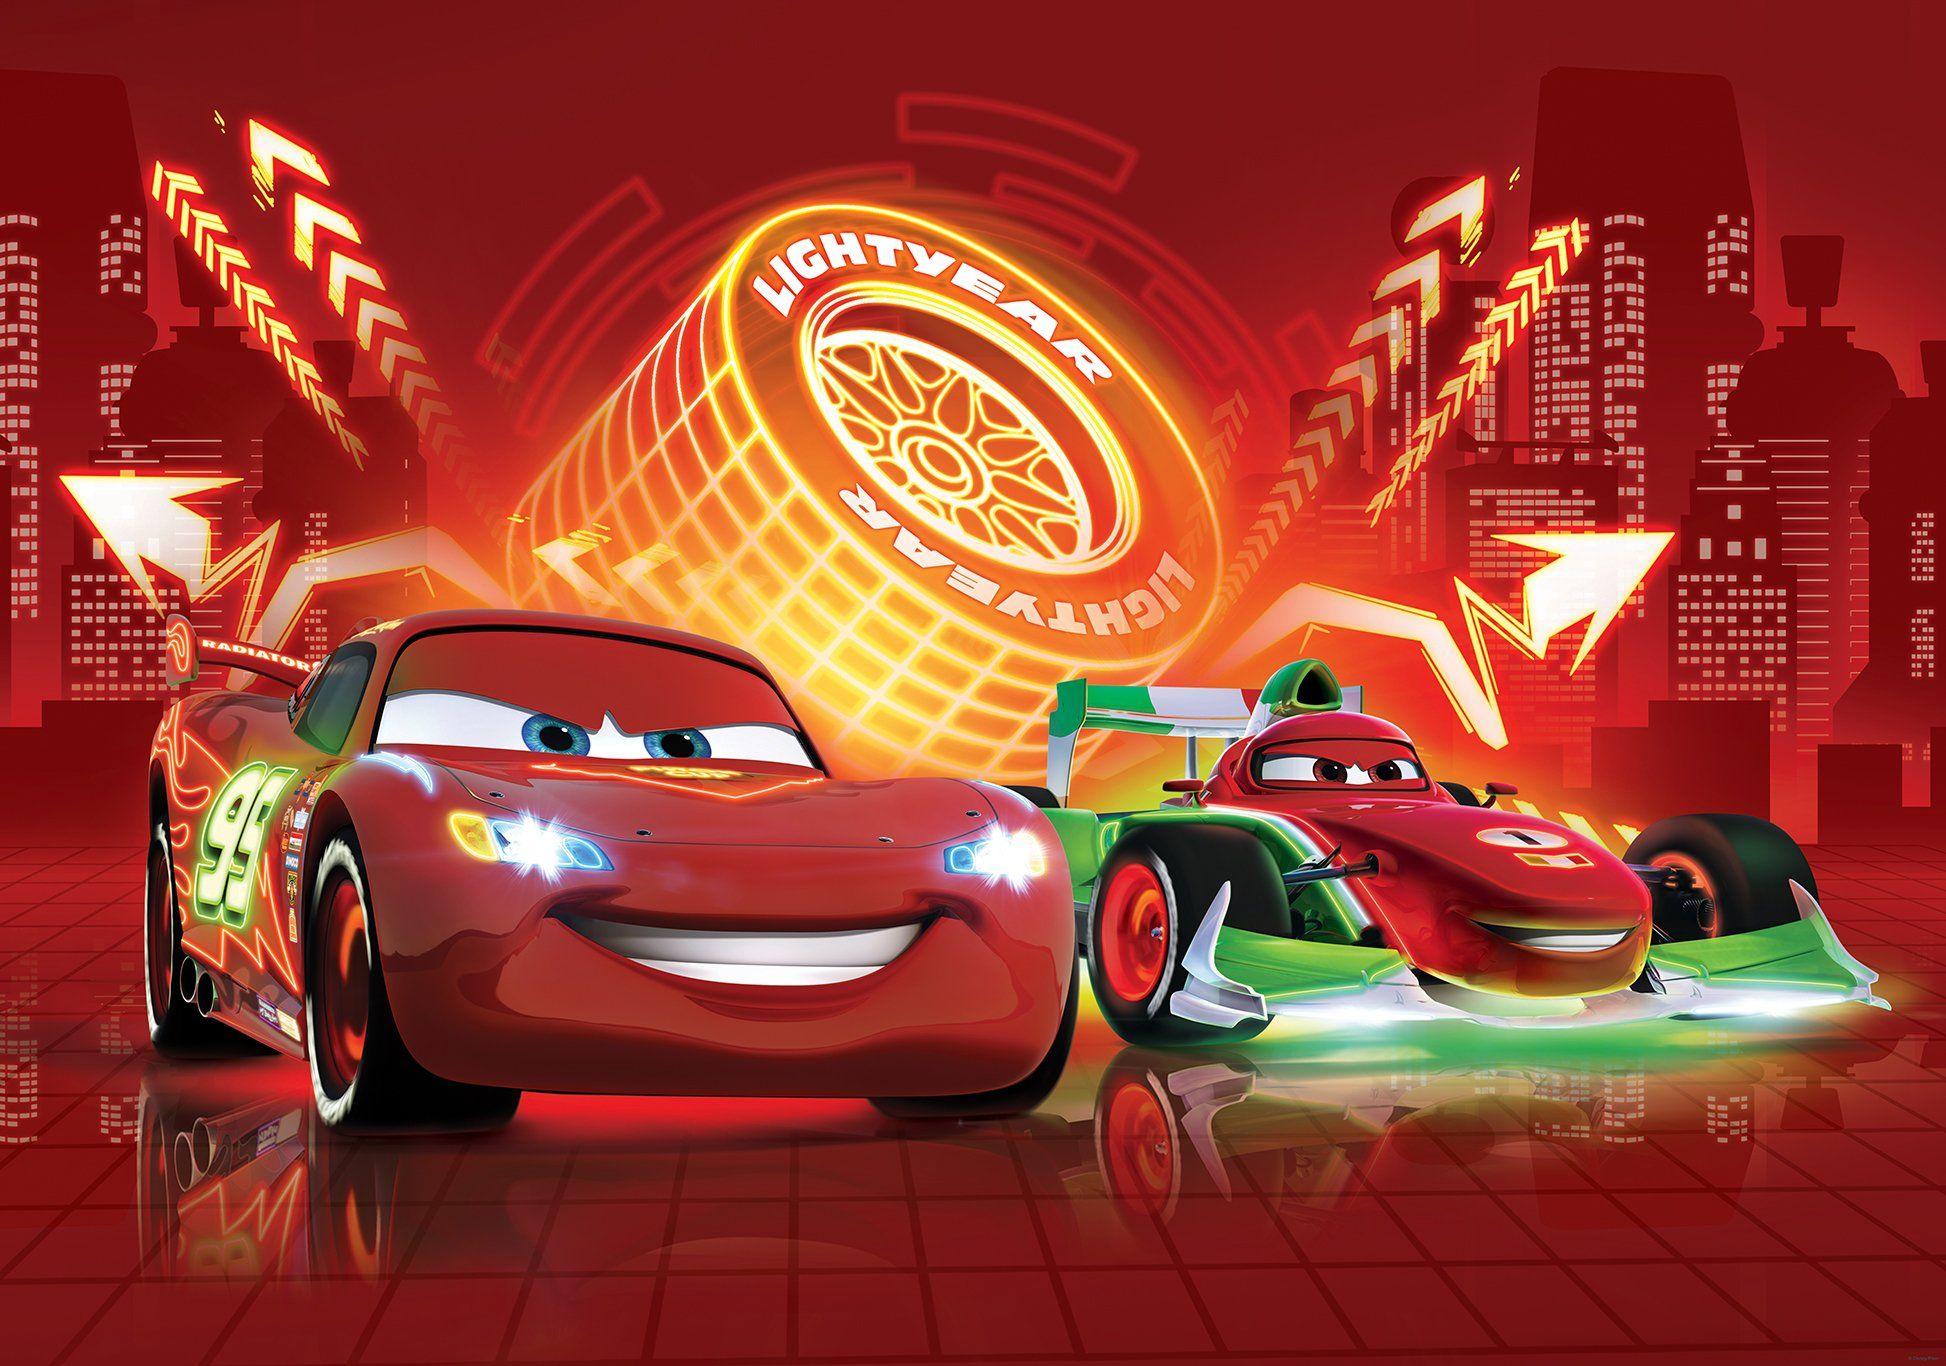 Lighting Mcqueen Wallpapers Disney Cars Wallpaper Disney Cars Movie Images And Photos Finder